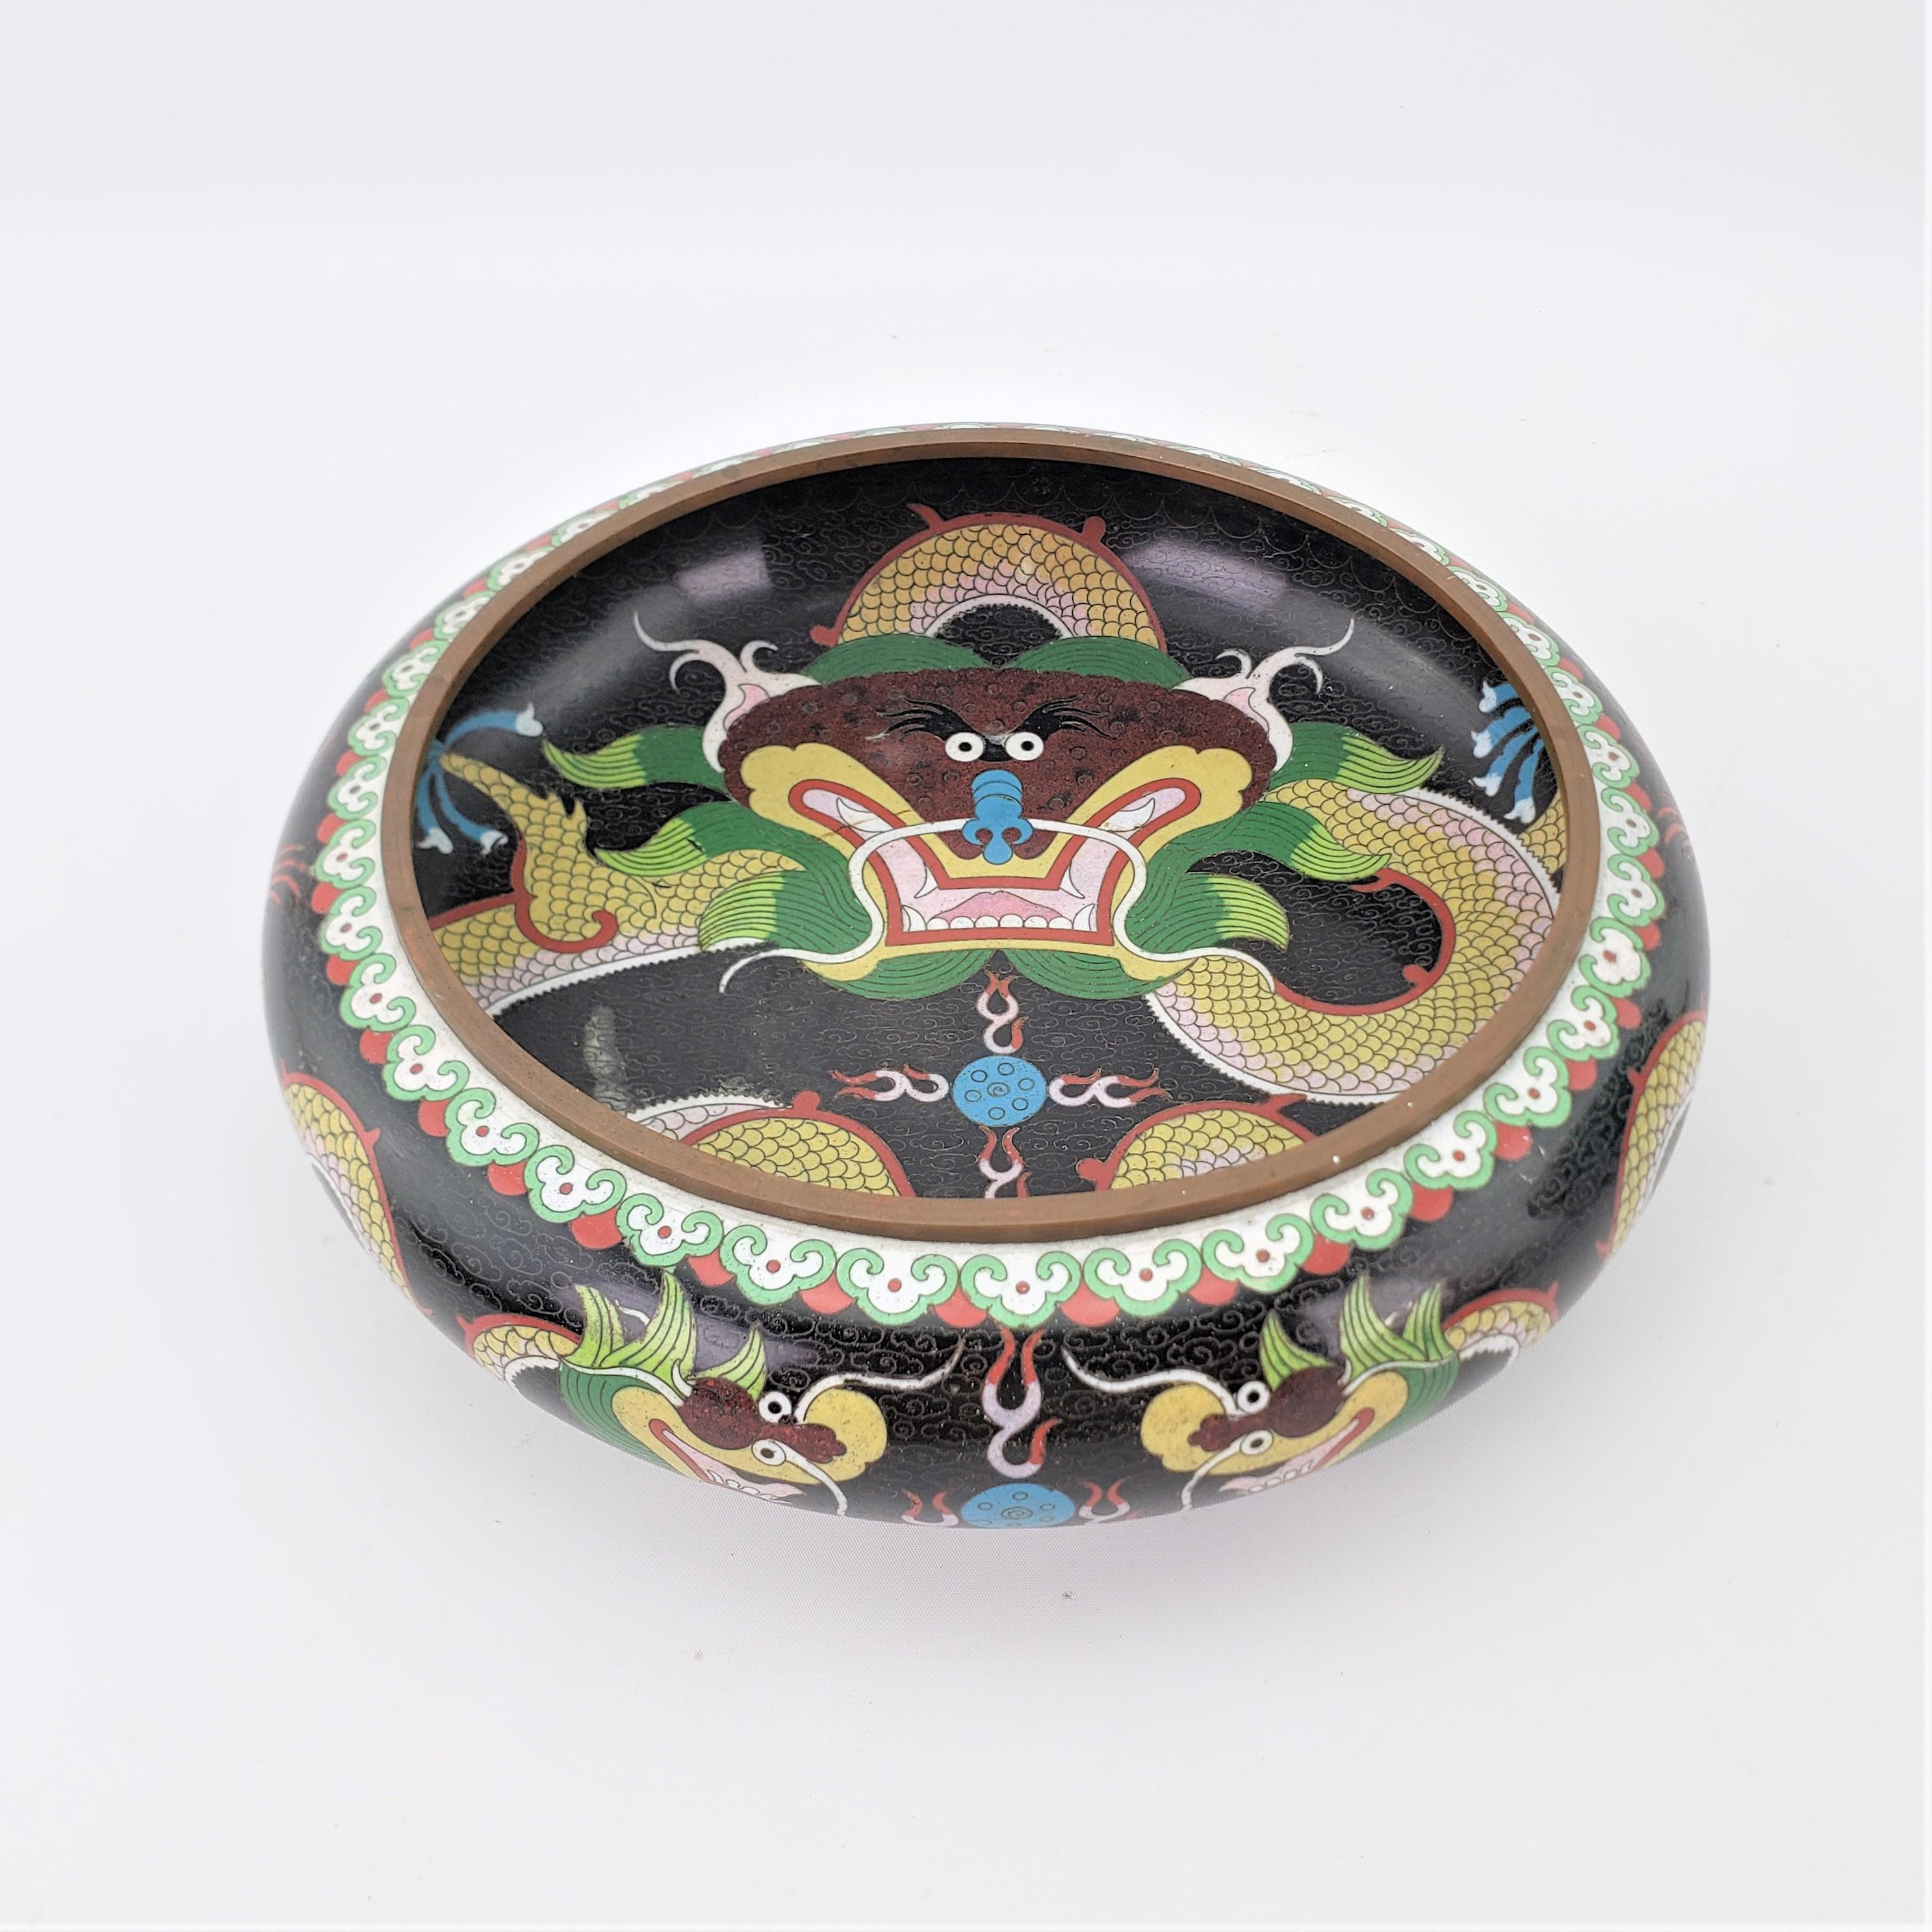 This large and very well executed cloisonnae bowl is signed by and unknown artist and originates from China in approximately 1900 in the period Chinese Export style. The bowl is done with black as the predominant color and decorated with Imperial